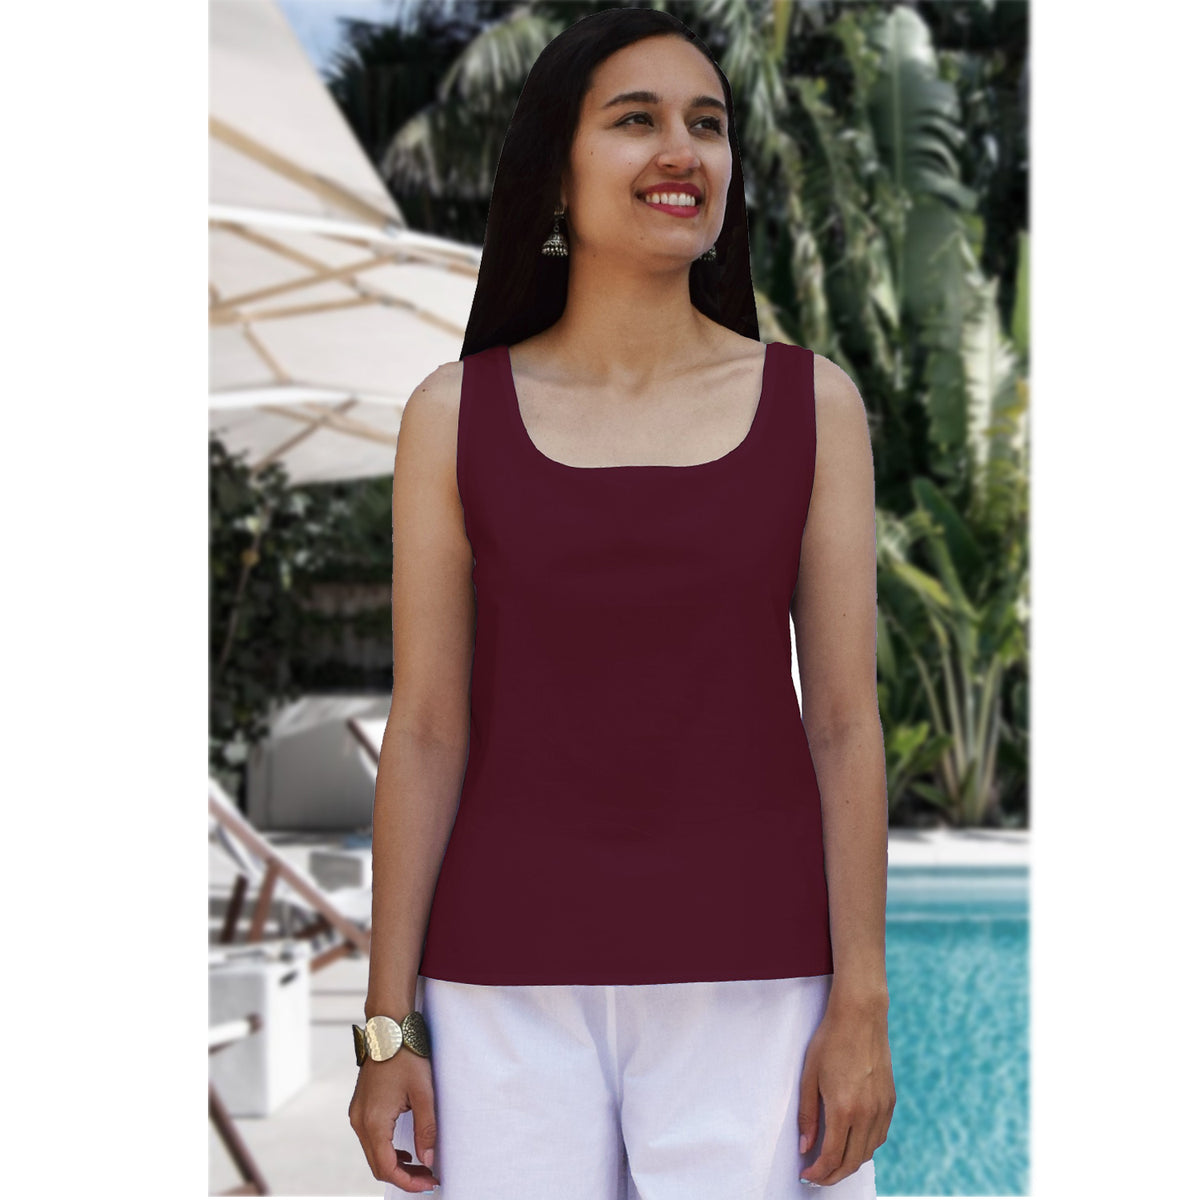 Women's Basic Short Cotton Camisoles ( Additional colors): Made to Order, Customizable